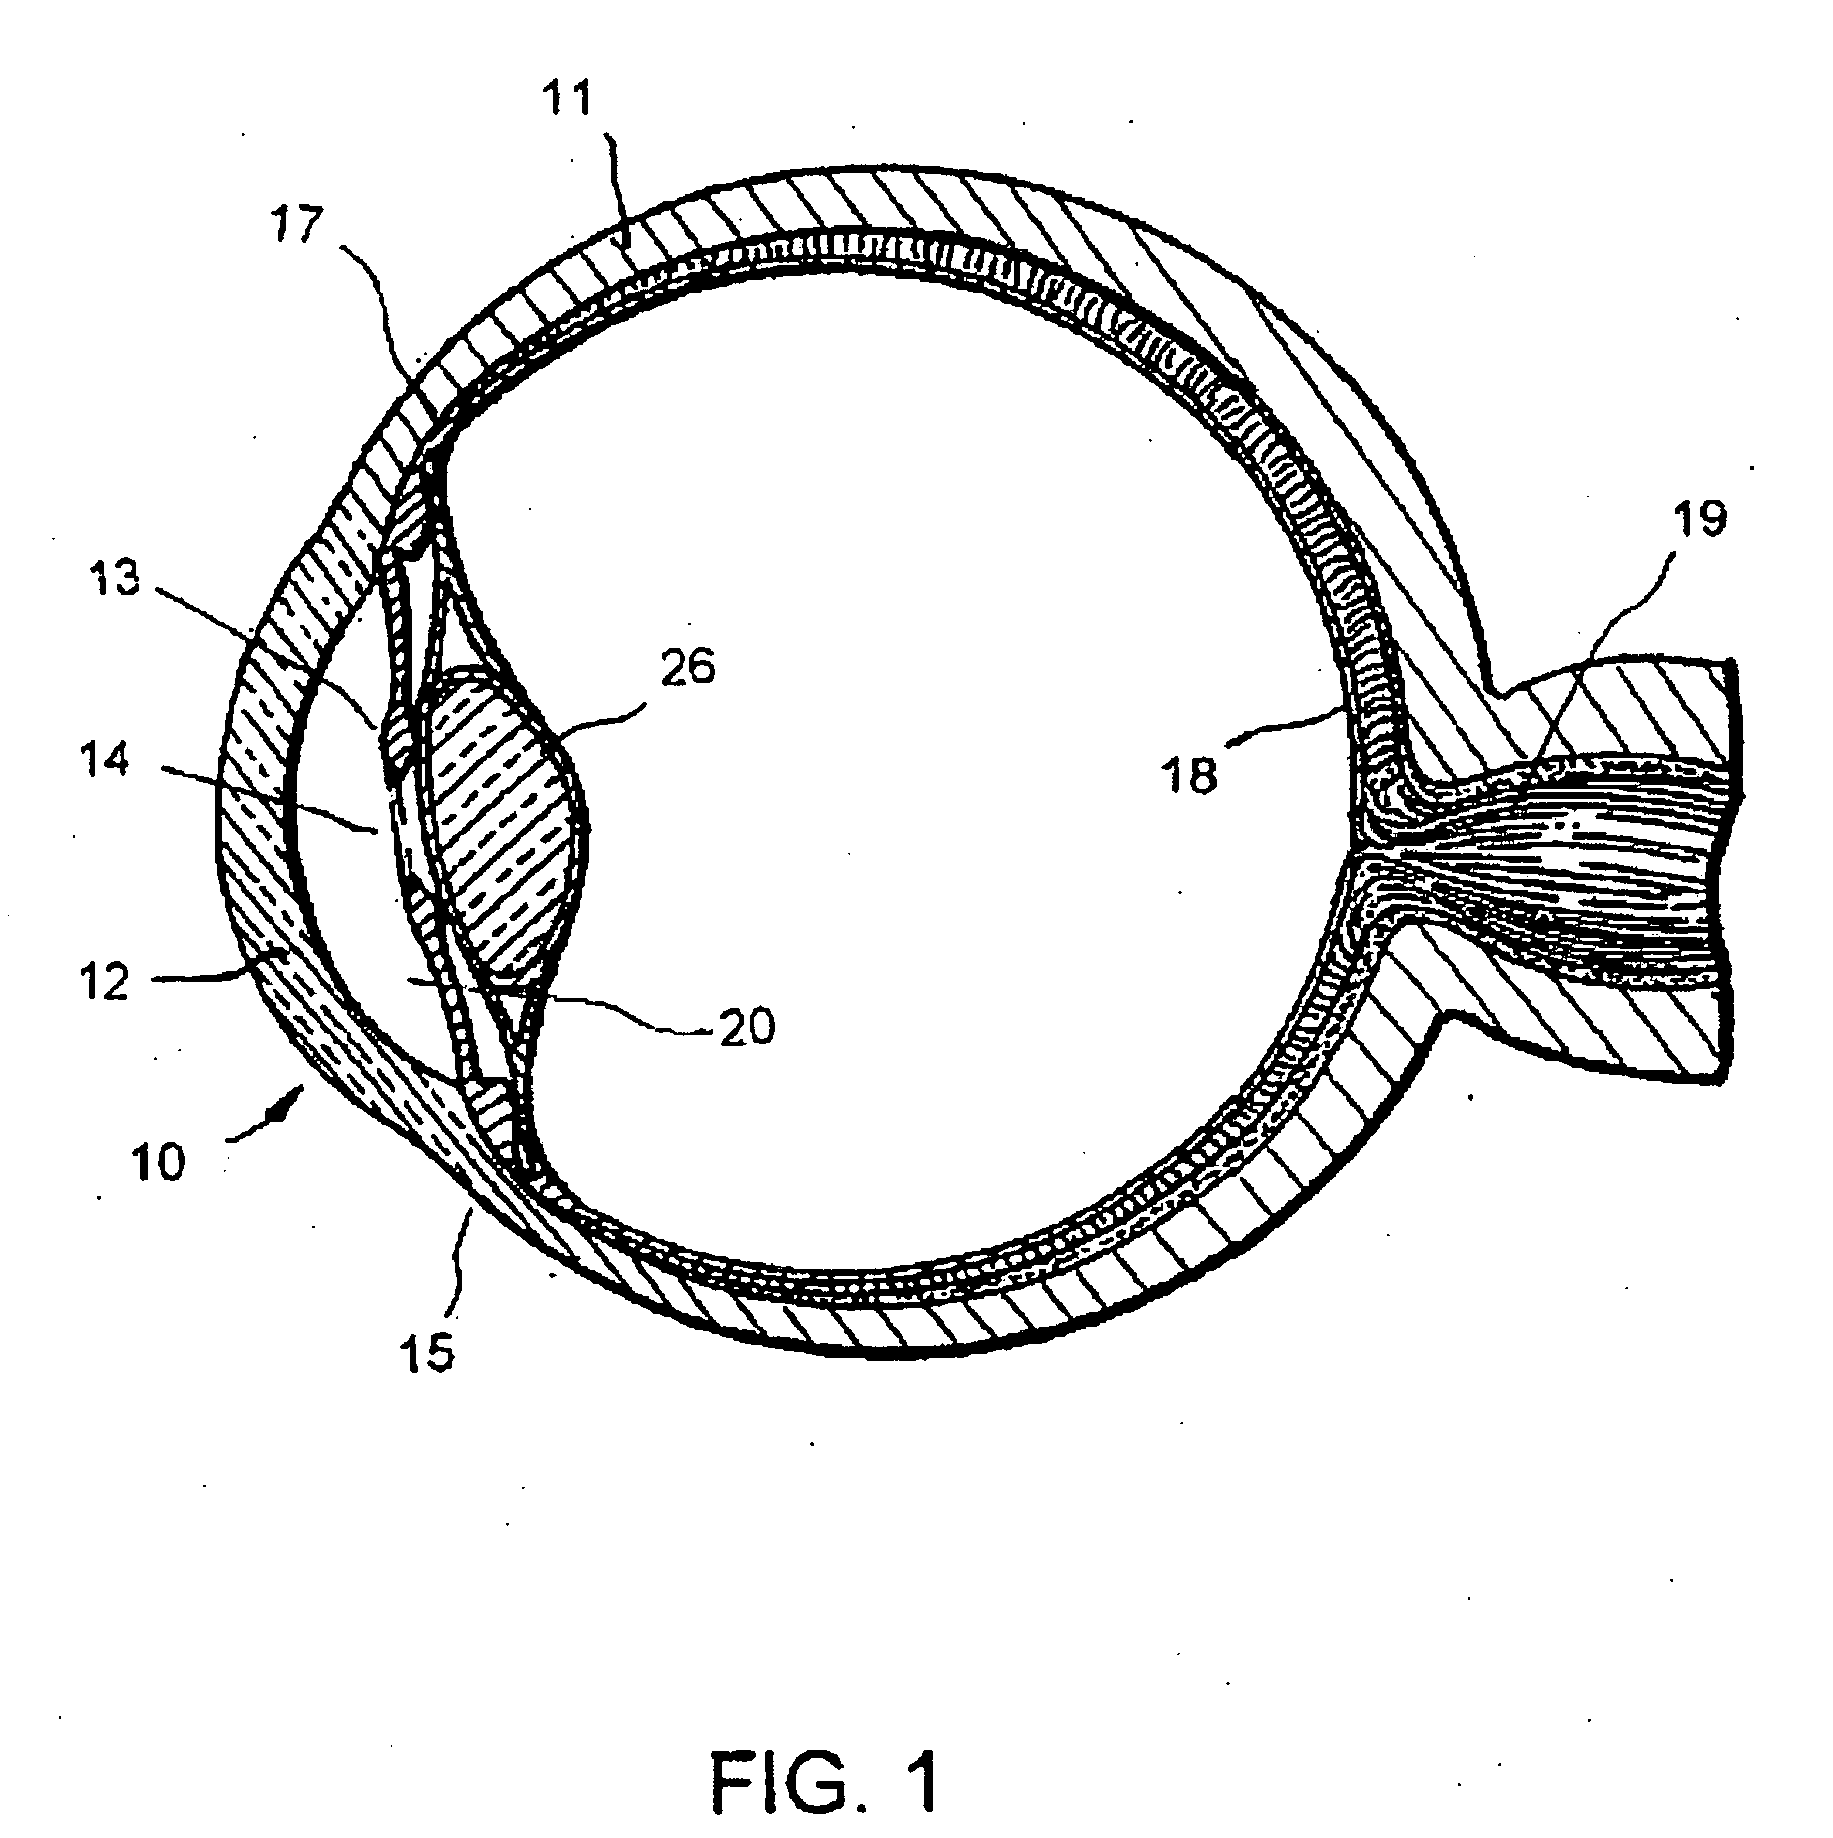 Method of treating glaucoma using an implant having a uniform diameter between the anterior chamber and Schlemm's canal